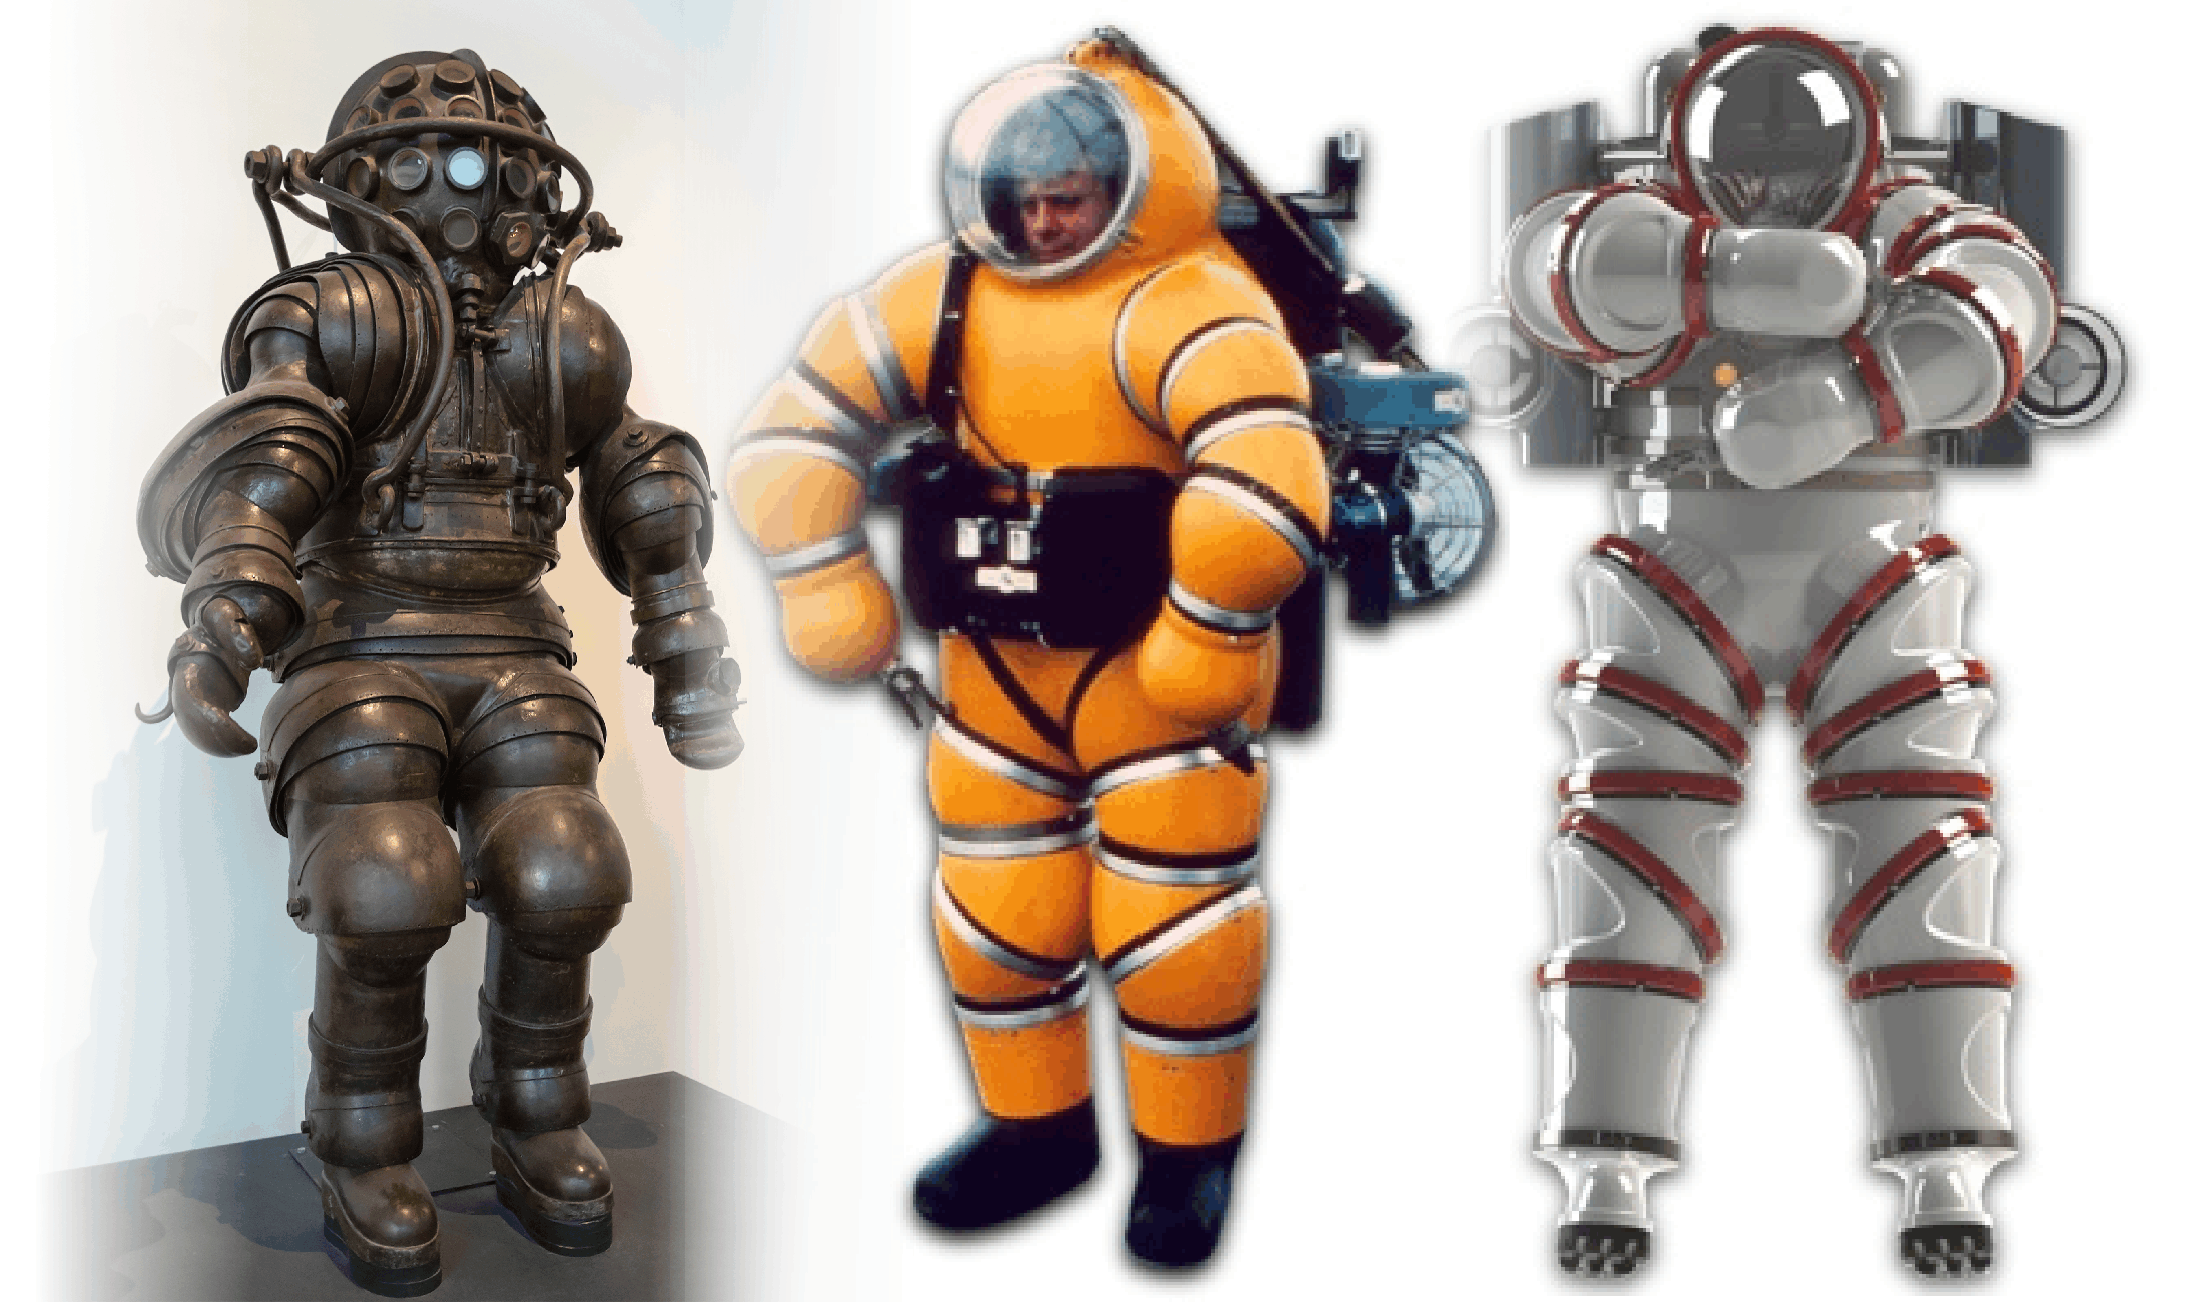 Evolution of ADS™ (atmospheric diving system): Left, 19th century; center, 20th century and right, 21st century